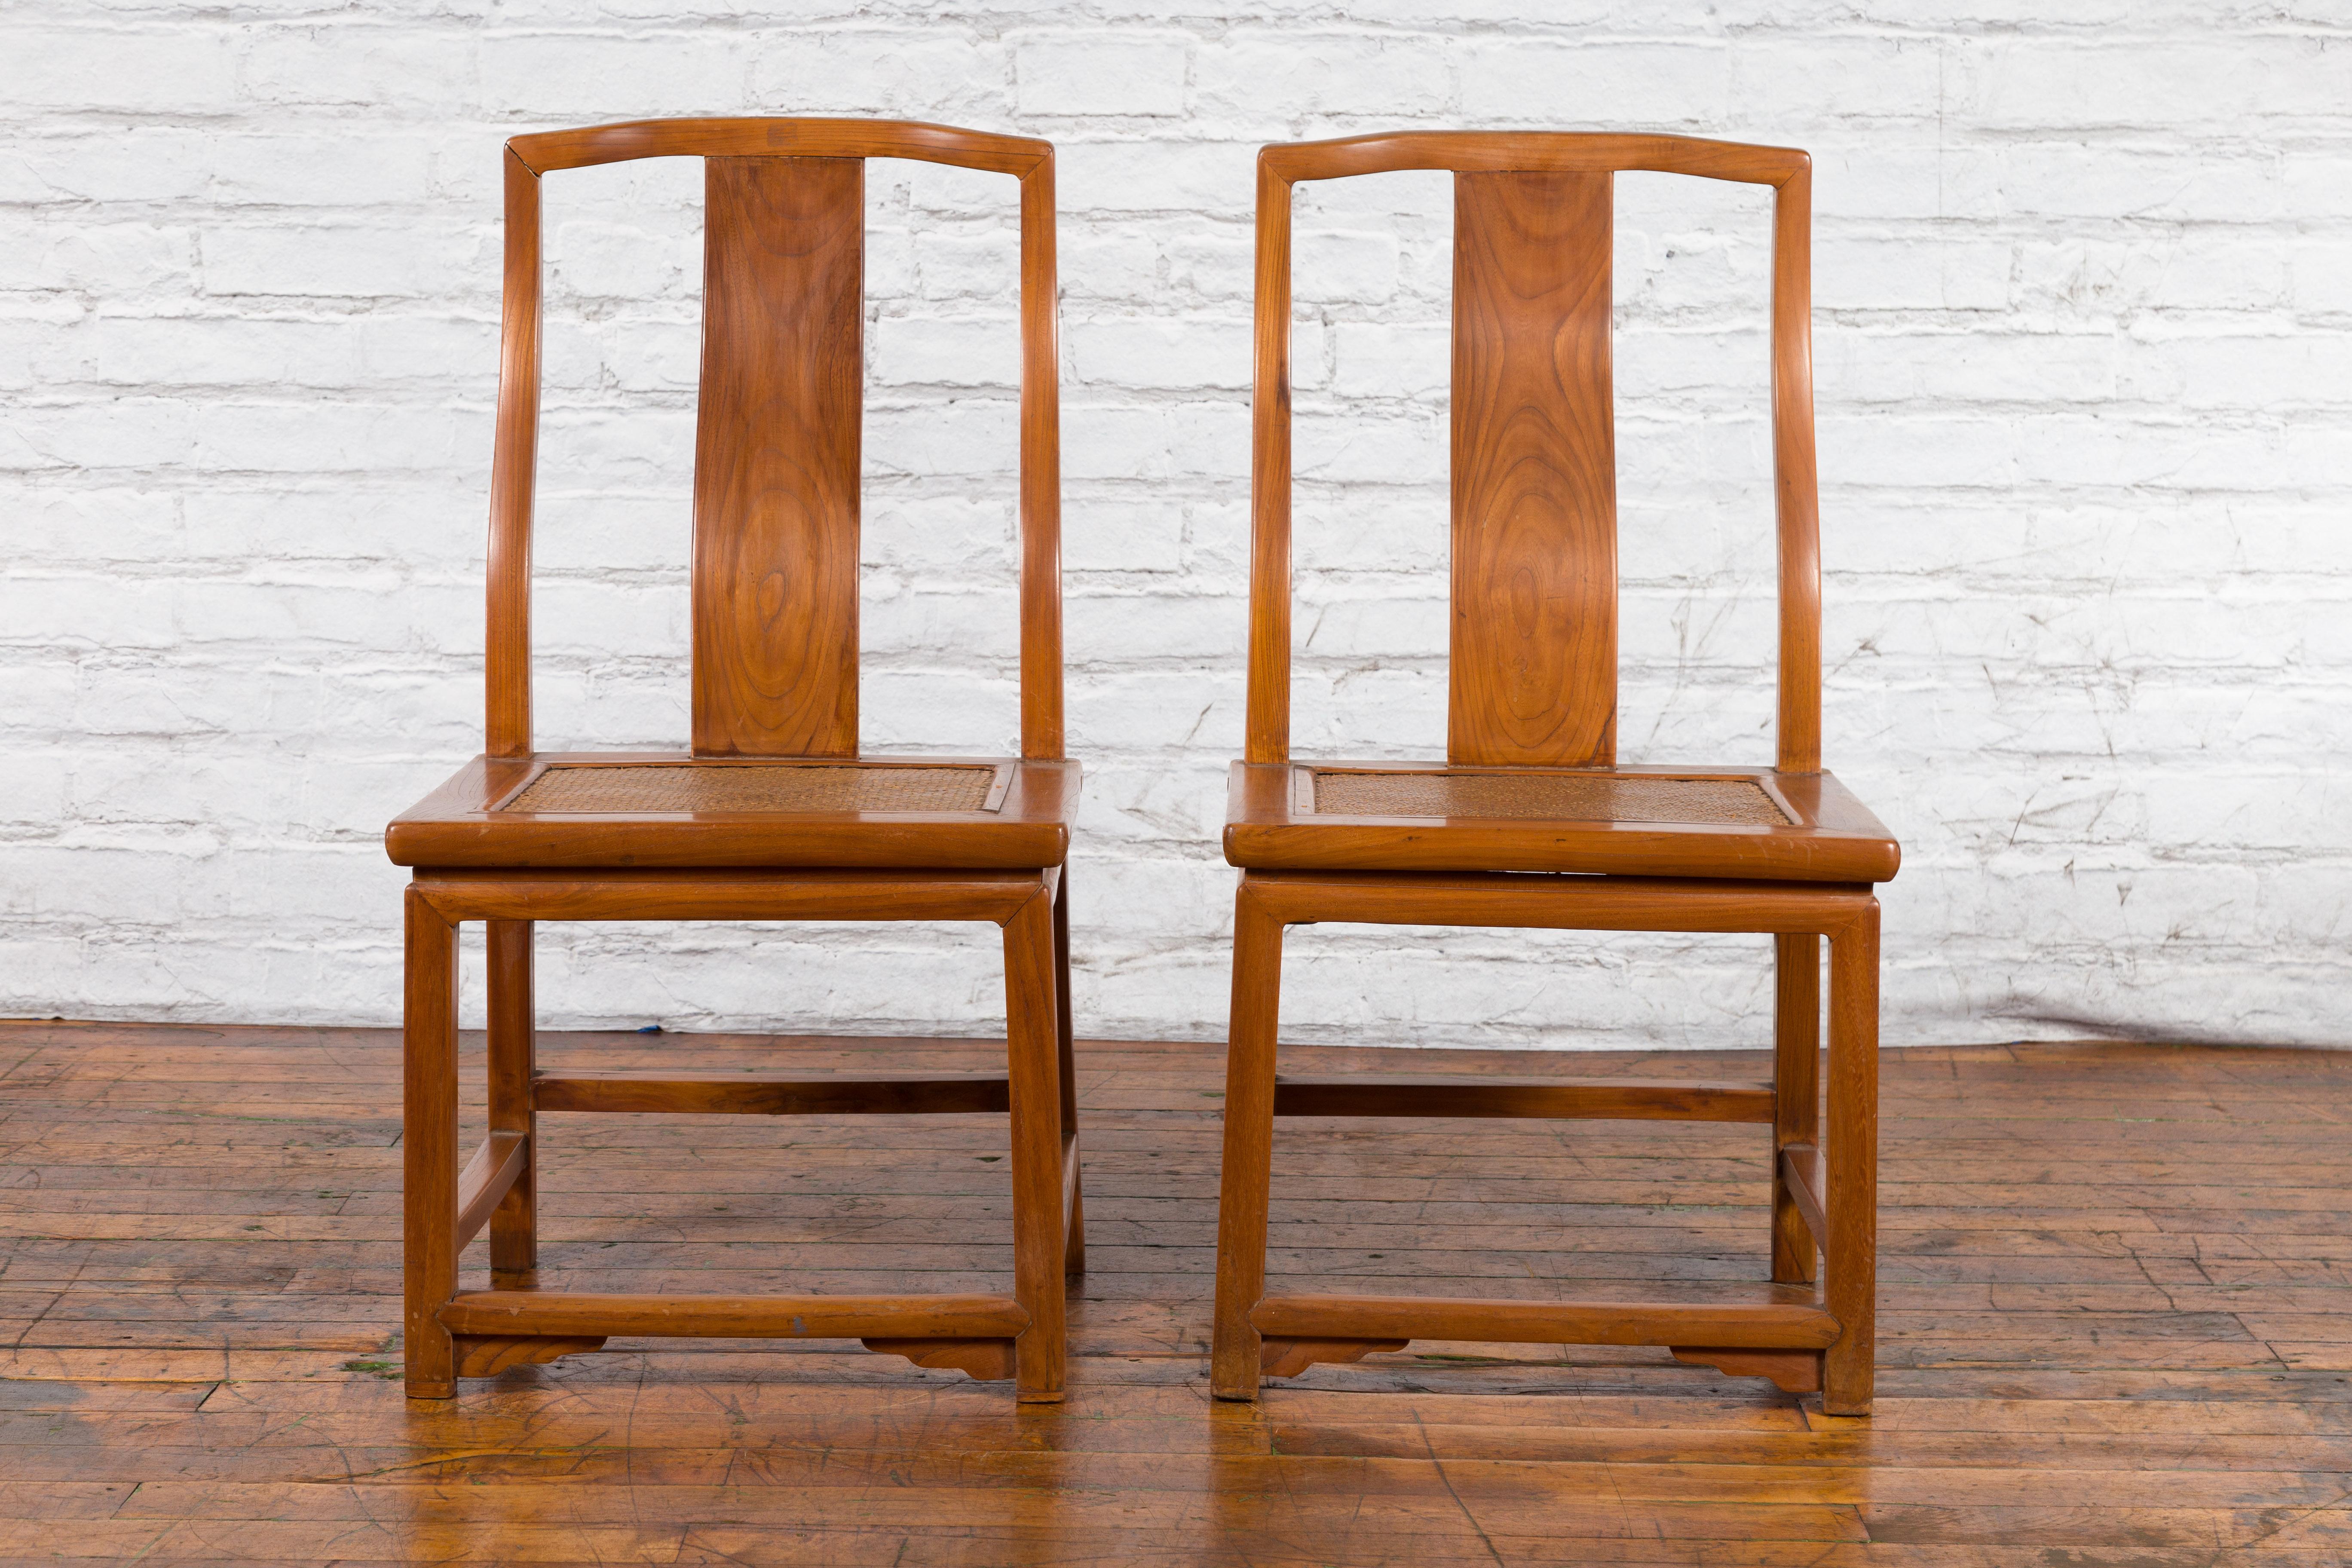 Pair of Ming Dynasty Style Yoke Back Side Chairs with Woven Rattan Seats For Sale 5